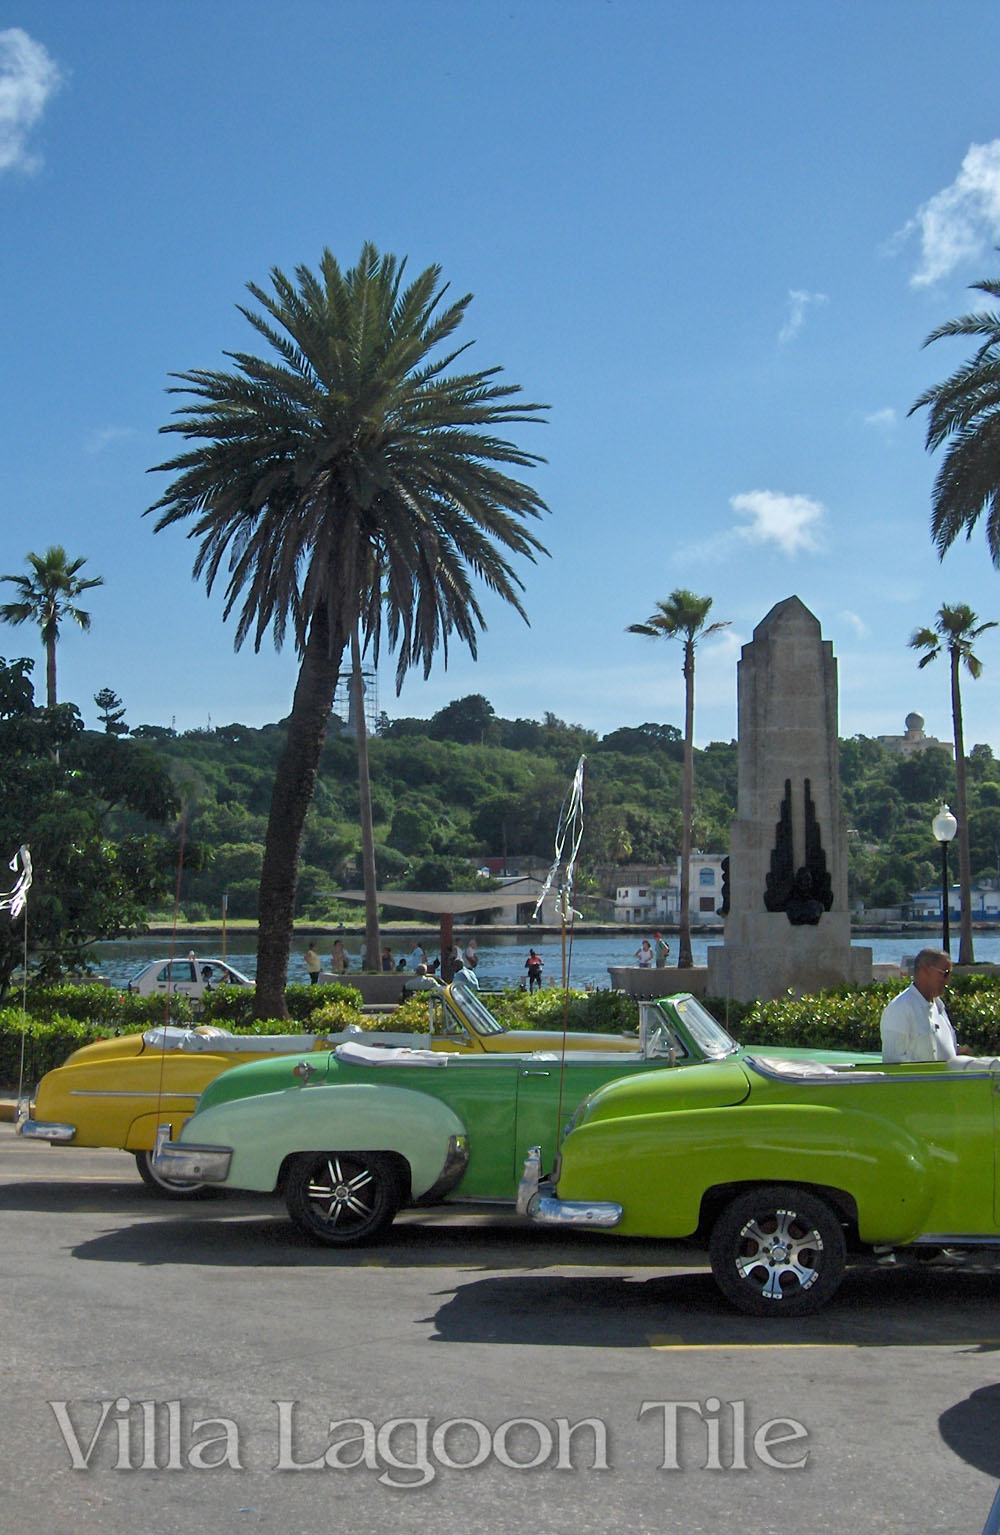 Many older N. American cars are lovingly cared for in Cuba.